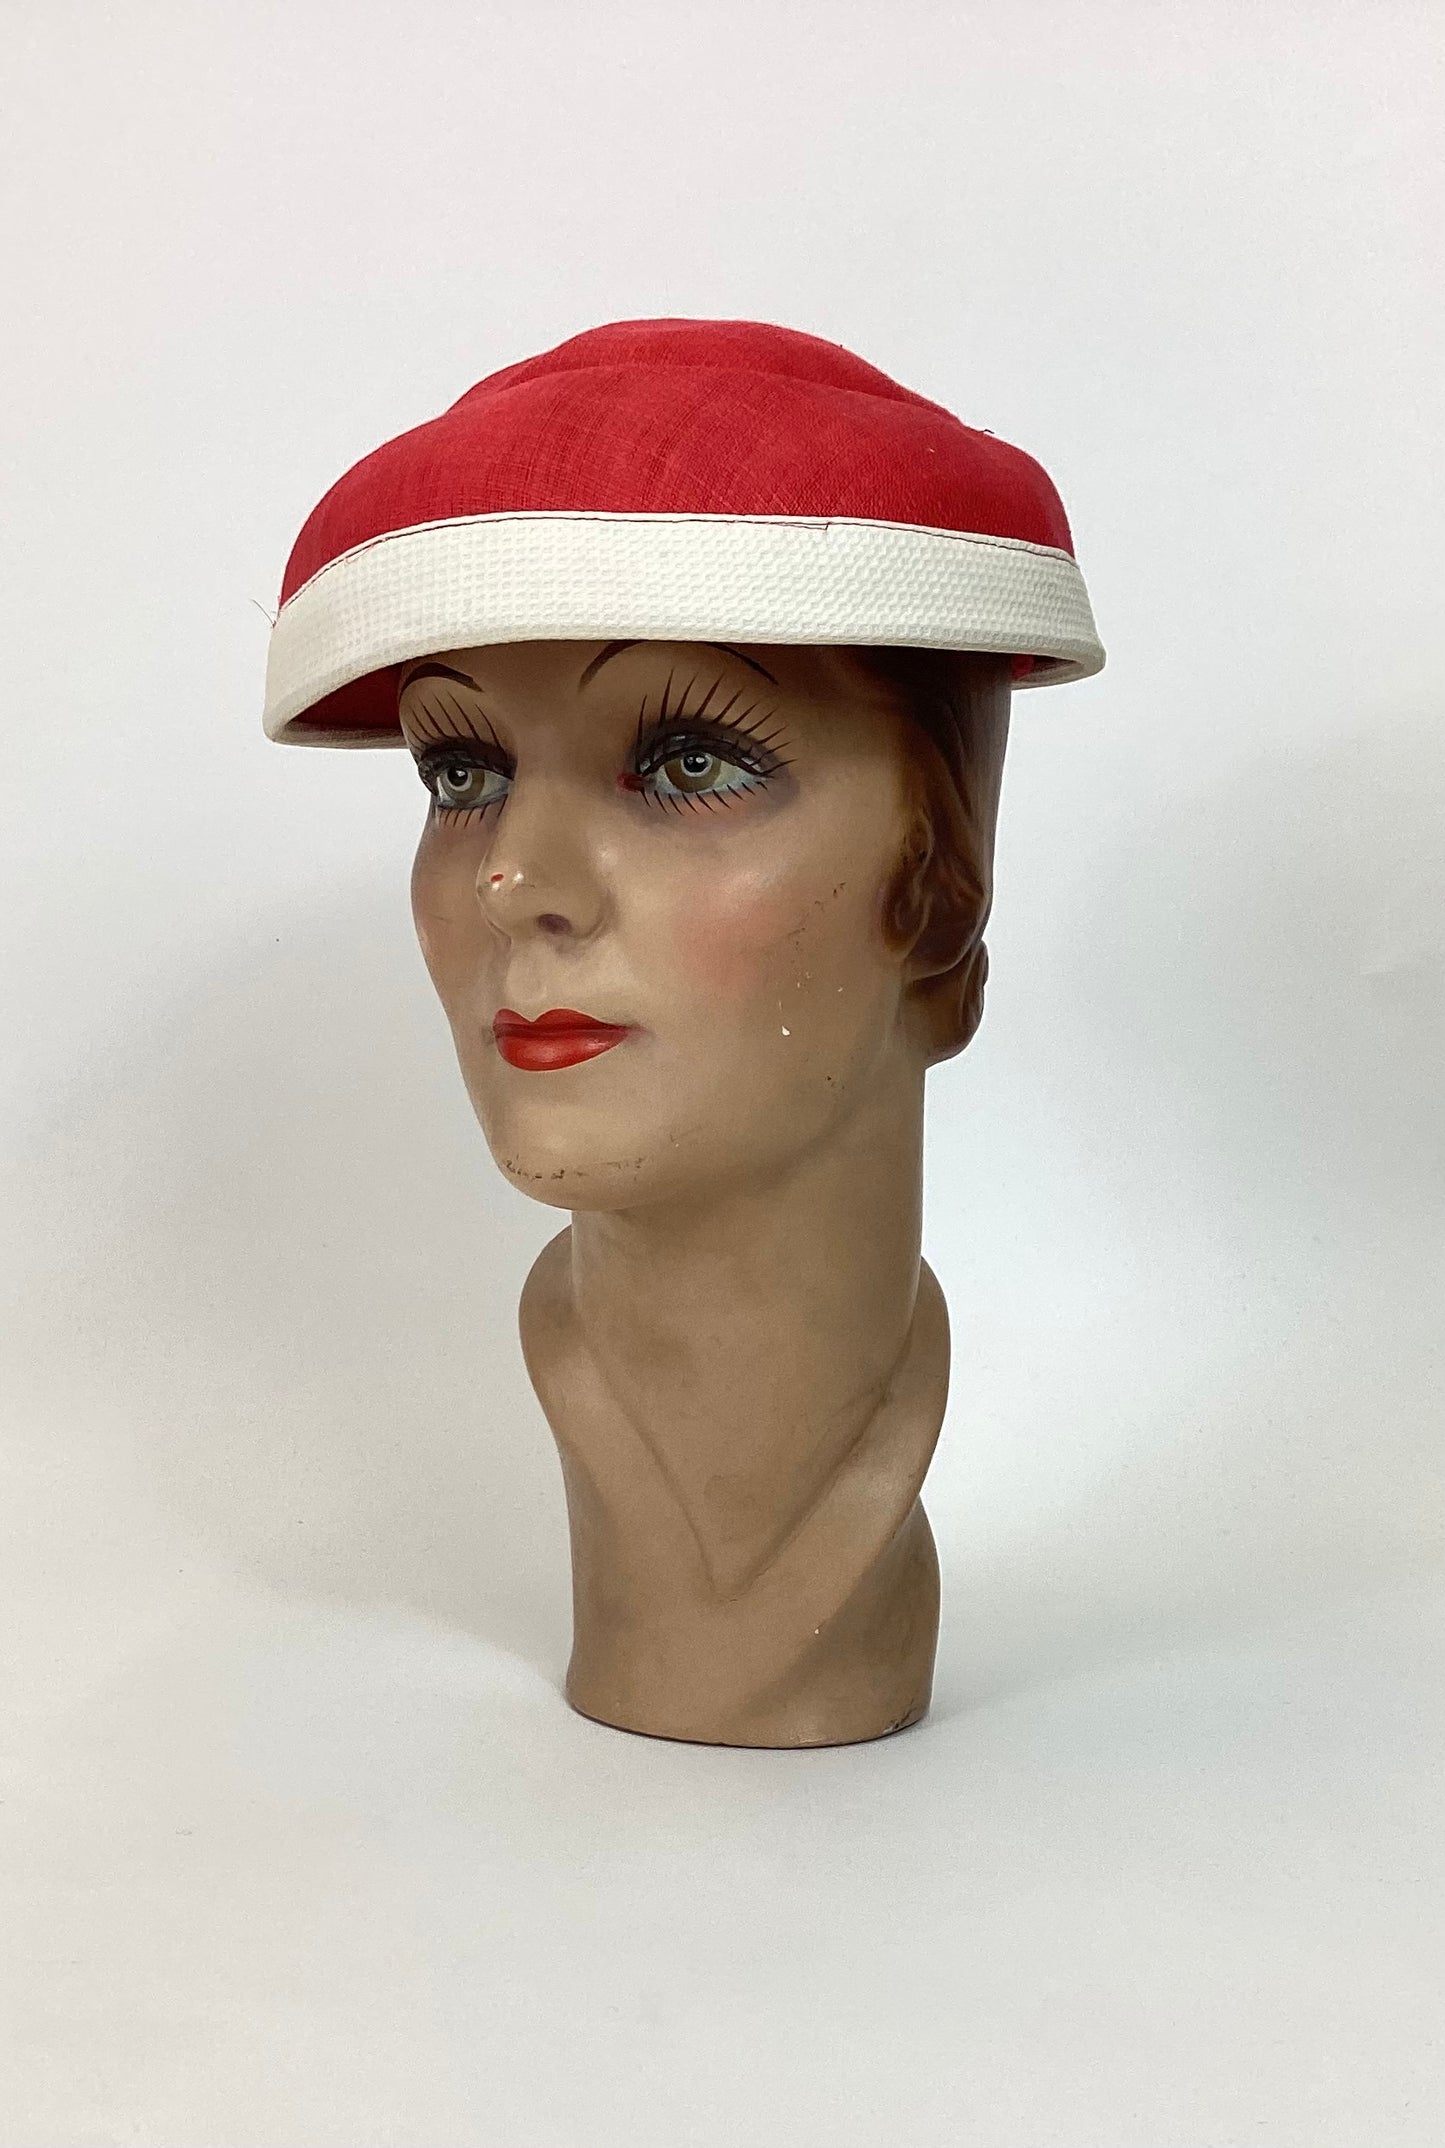 Original 50’s Fabulous Hat - Lipstick Red and Ivory contrast.